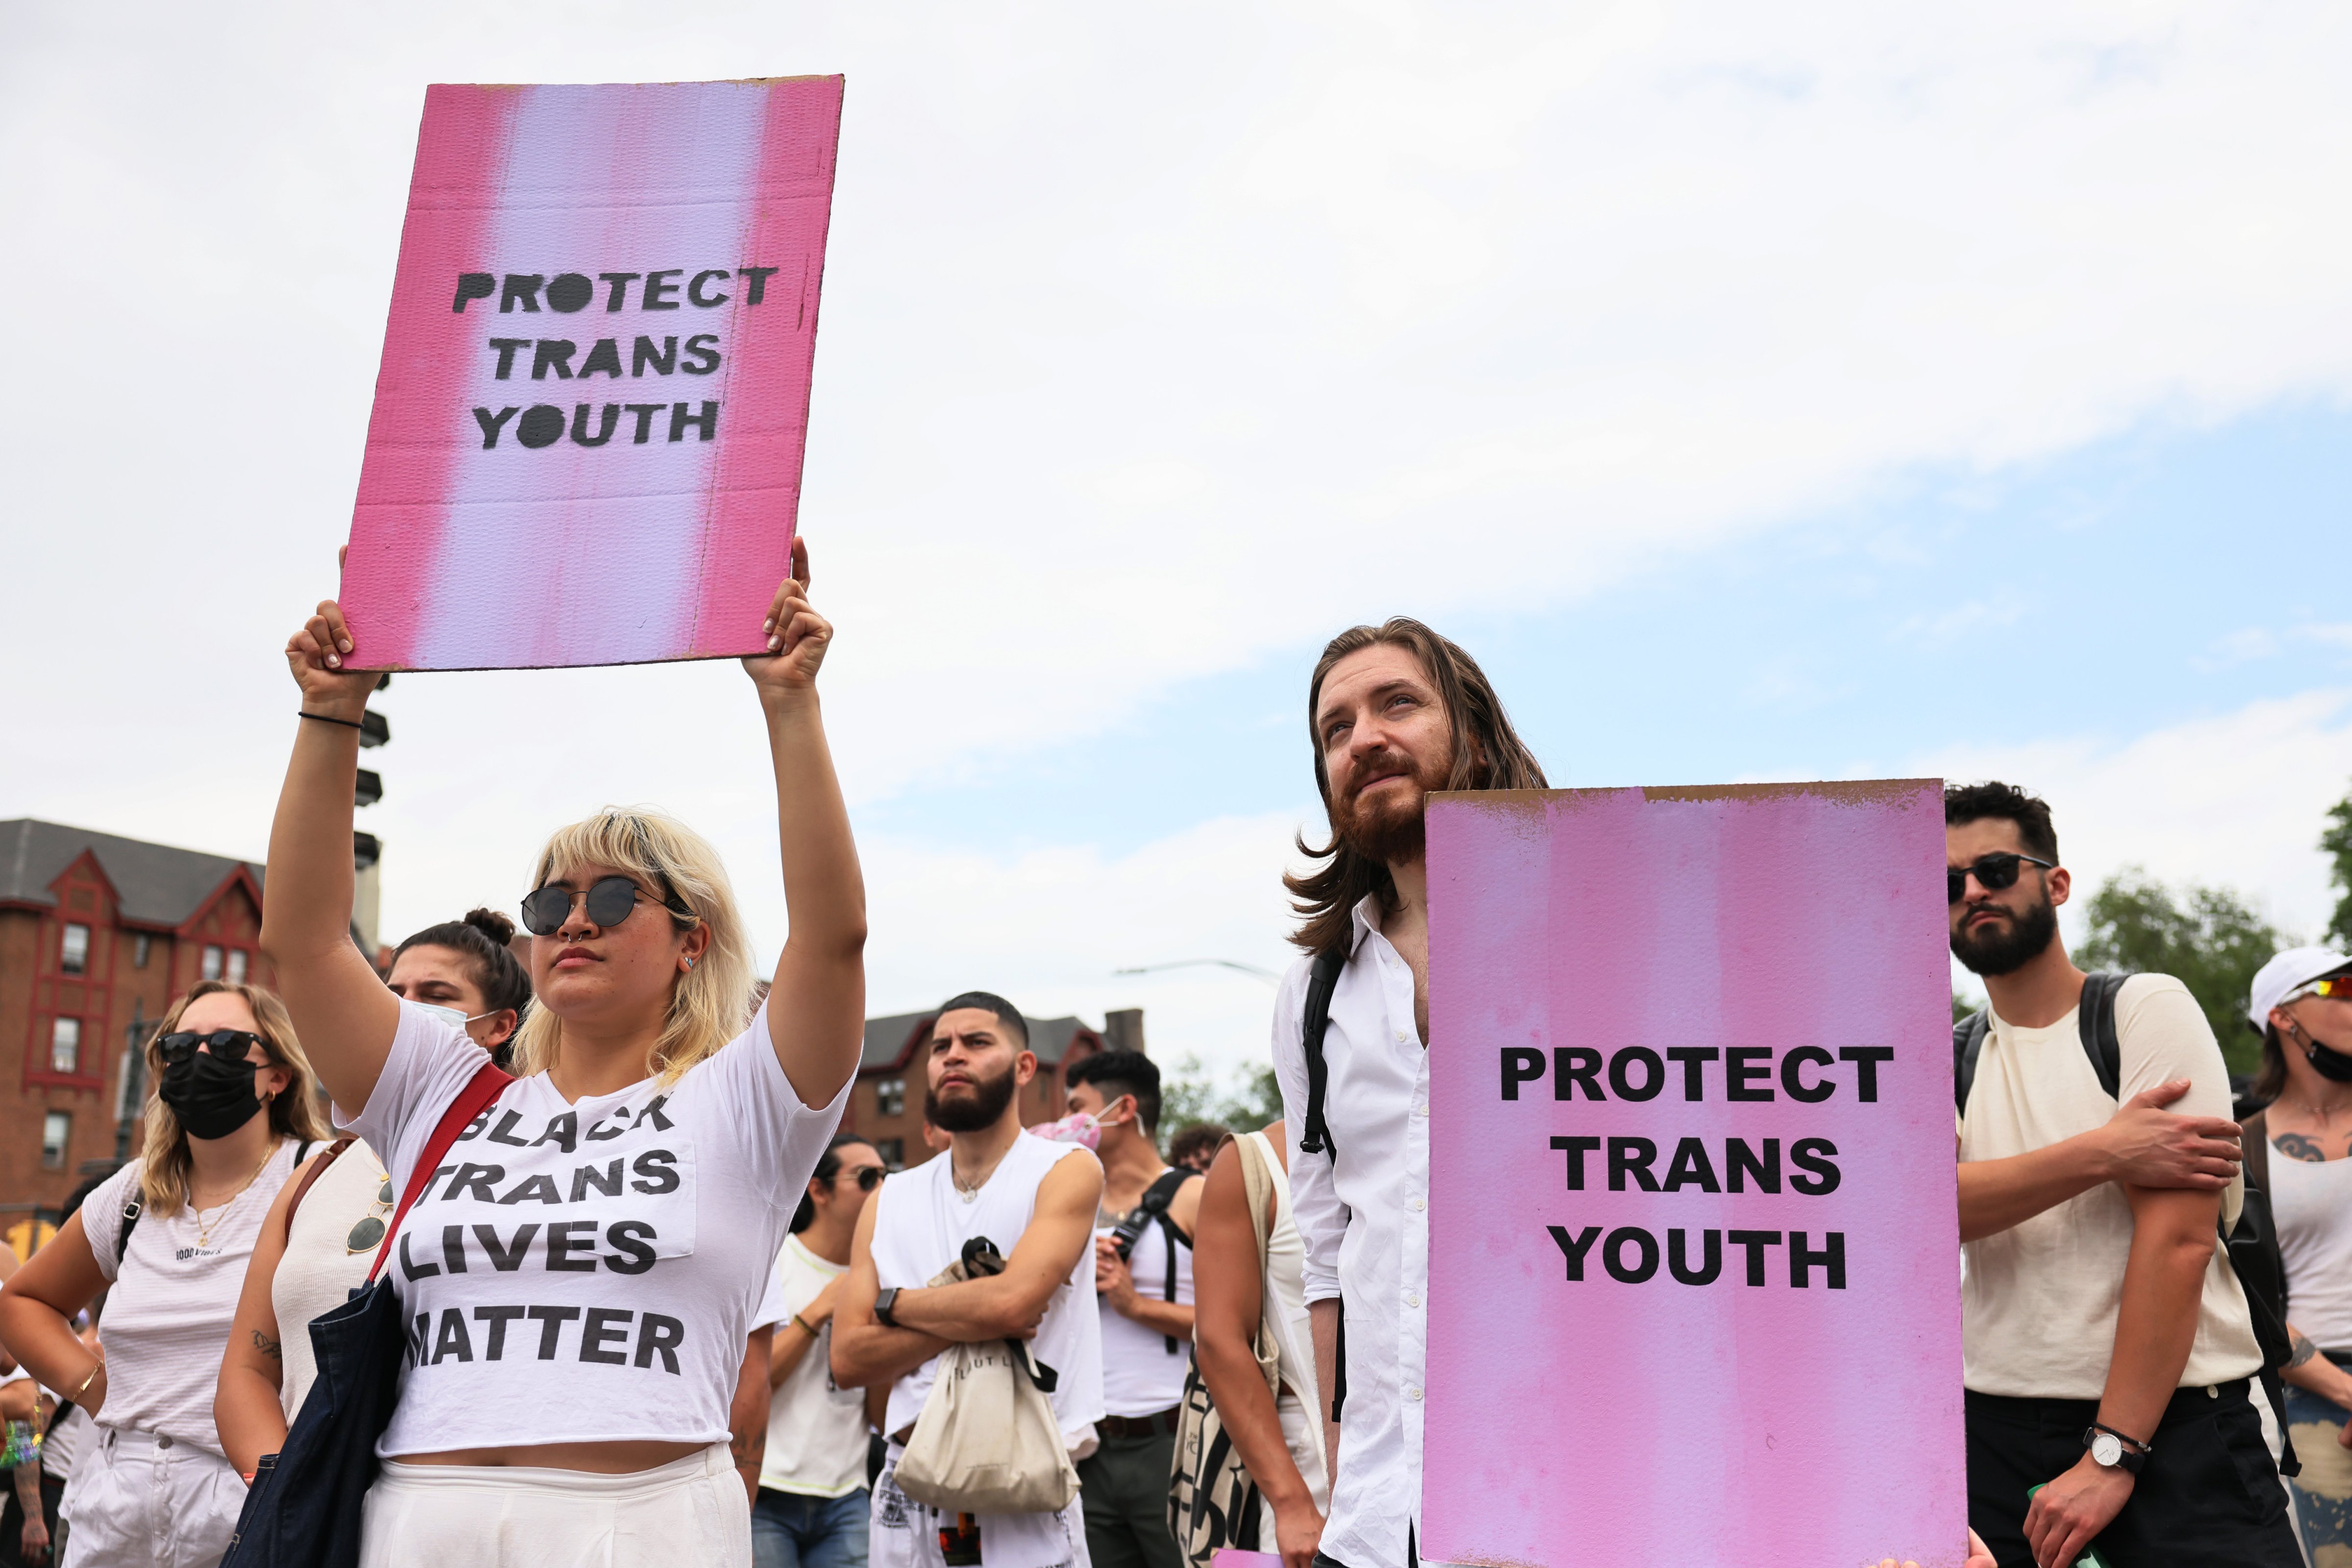 People listen to speakers during a "Protect Trans Youth" event on June 13, 2021 in Brooklyn, New York City. (Michael M. Santiago—Getty Images)